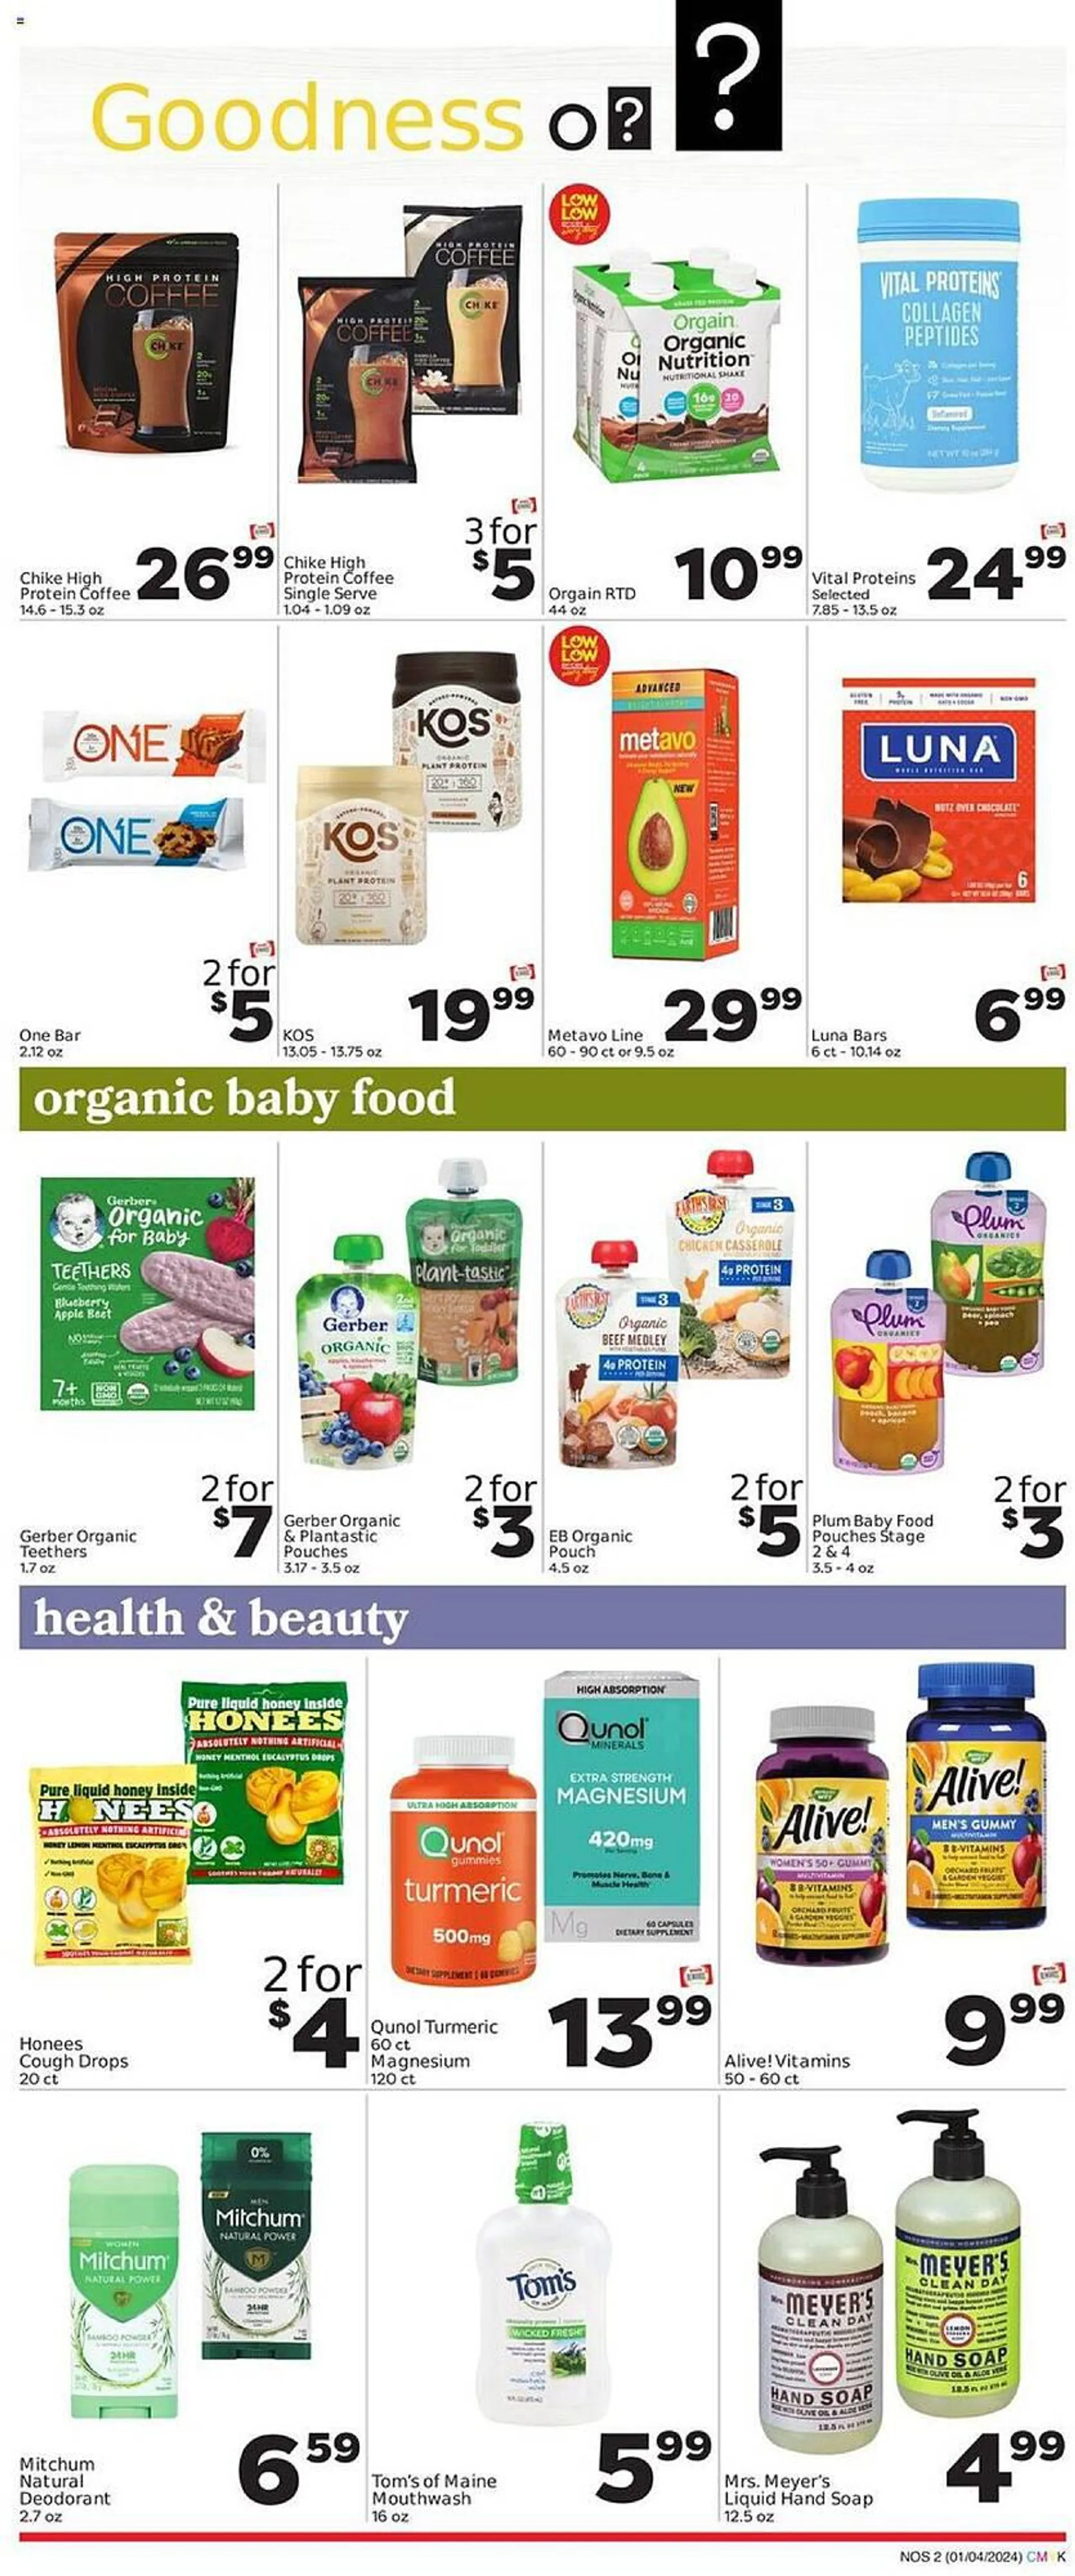 Weekly ad Weis Markets Weekly Ad from January 4 to January 31 2024 - Page 1